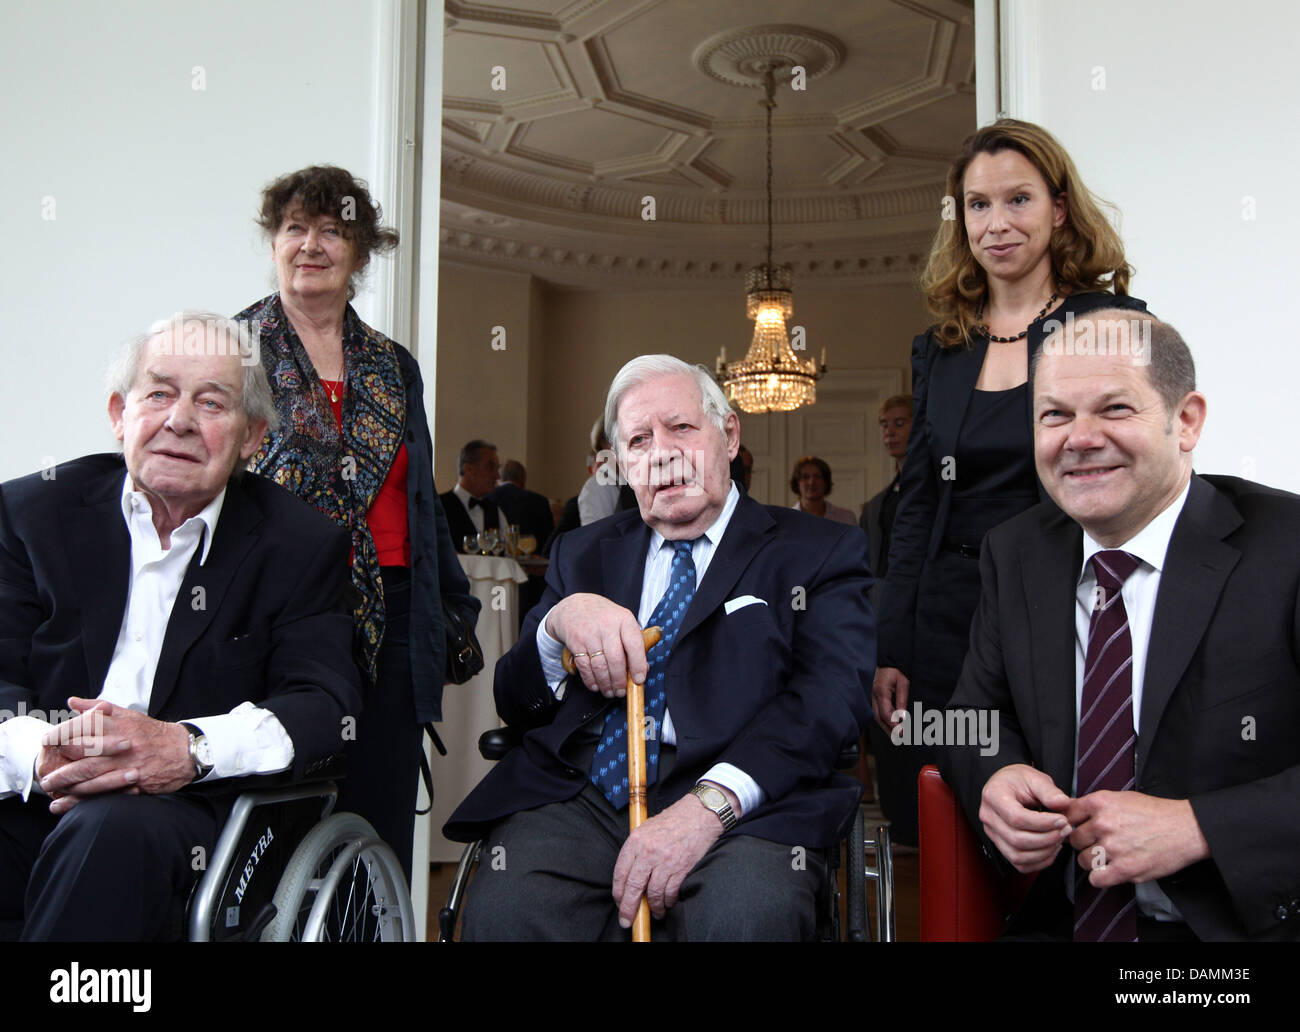 On the occassion of his 85th birthday  the writer and honorary citizen of Hamburg, Siegfried Lenz (L-R), sits next to his wife Ulla, former chancellor Helmut Schmidt, Carola Veit, president of Hamburg citizenship and mayor Olaf Scholz inside the guests house of the senat in Hamburg, Germany, 22 June 2011. Lenz celebrated his birthday on 17 March 2011. Photo: ULRICH PERREY Stock Photo